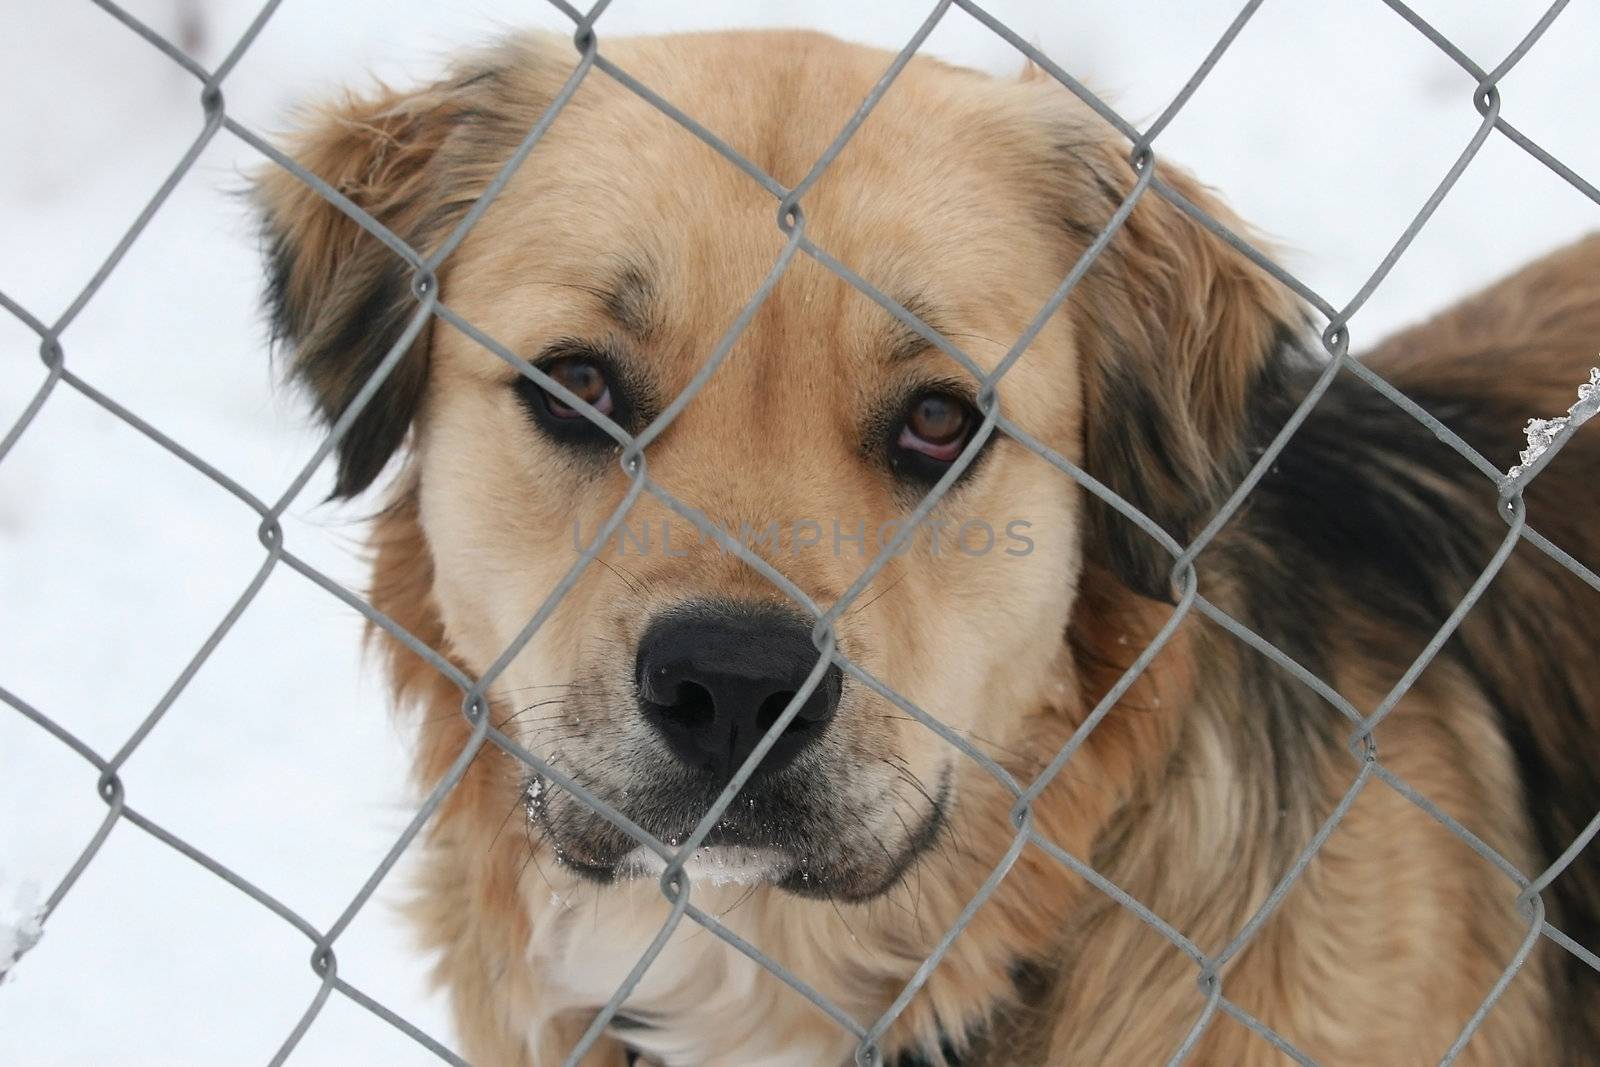 A sad-eyed dog (Canis lupus familiaris) looks through a fence.  Could be used to present the plight of impounded strays, or animal welfare.